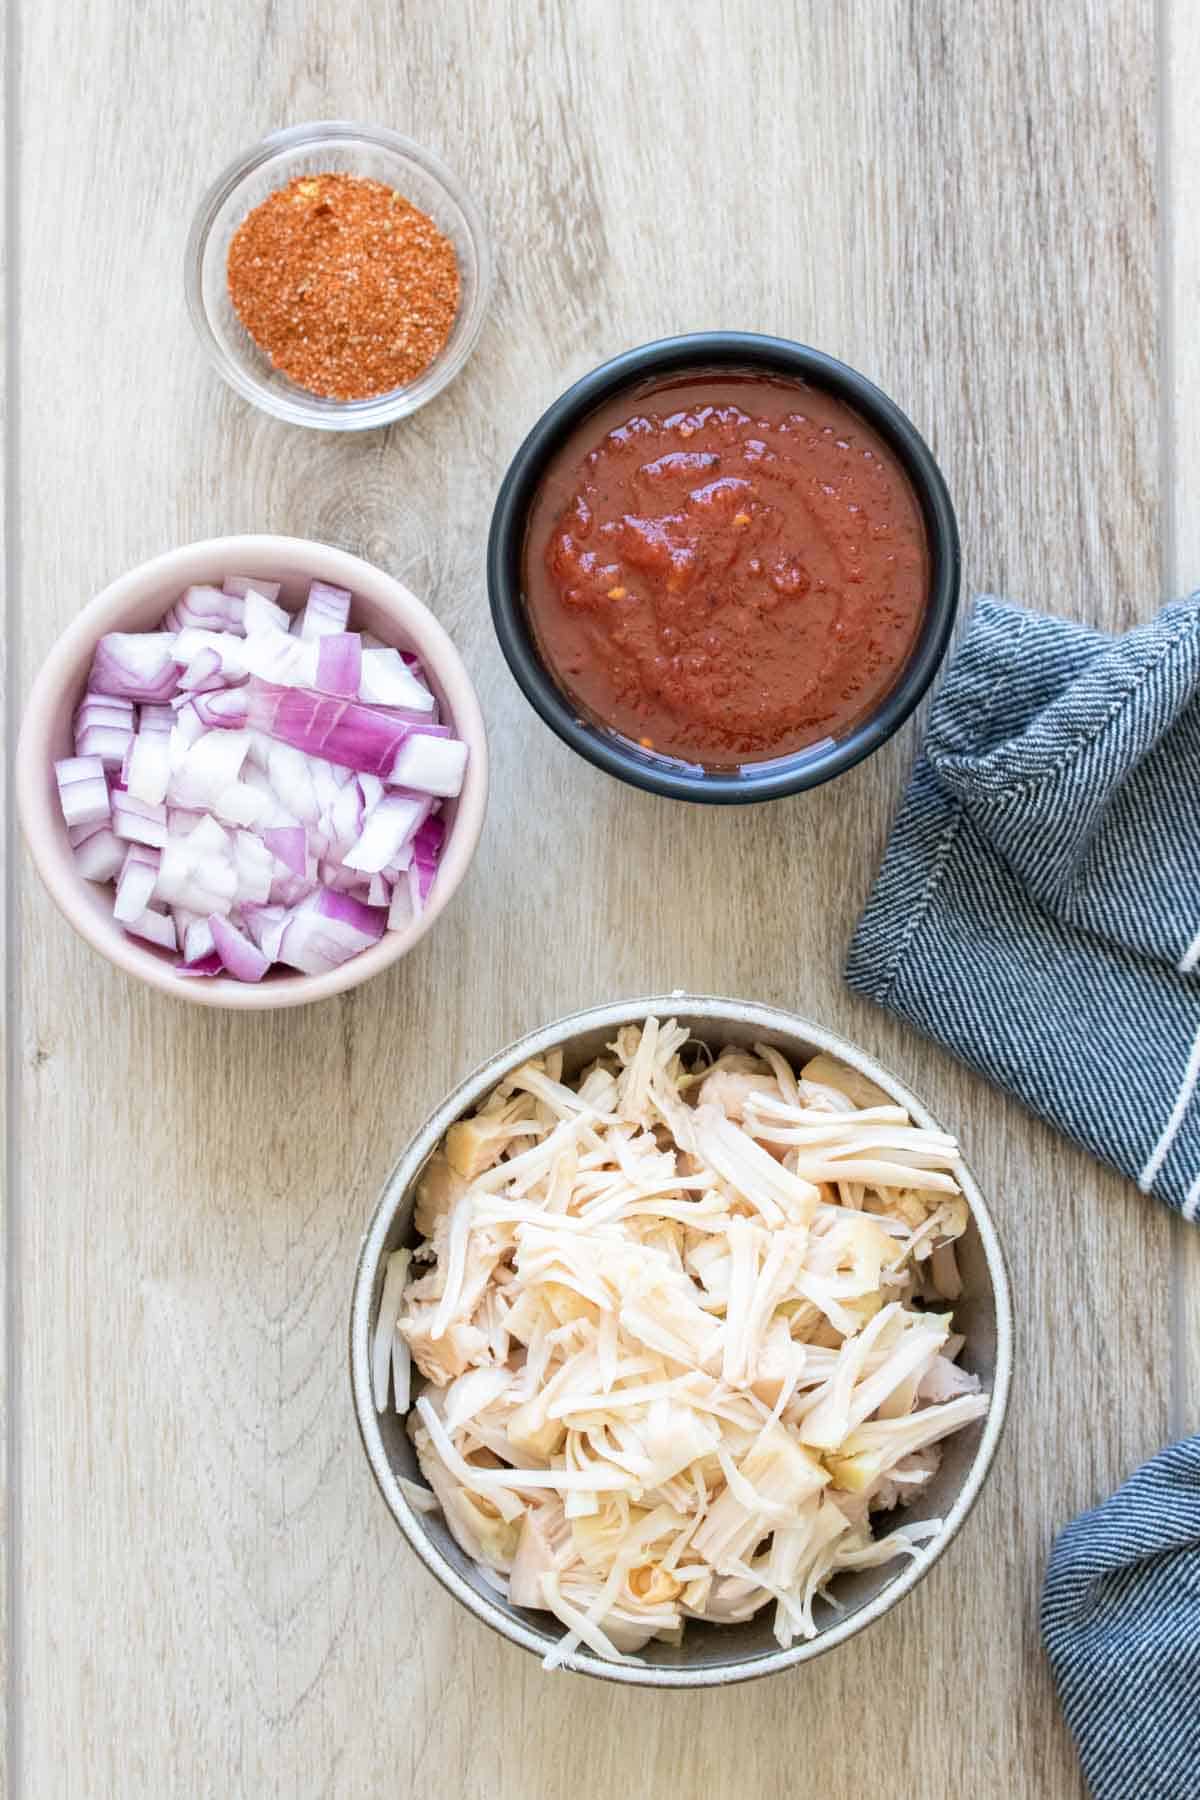 Four bowls with jackfruit, salsa, red onion and taco seasoning on a light wood surface next to a blue towel.